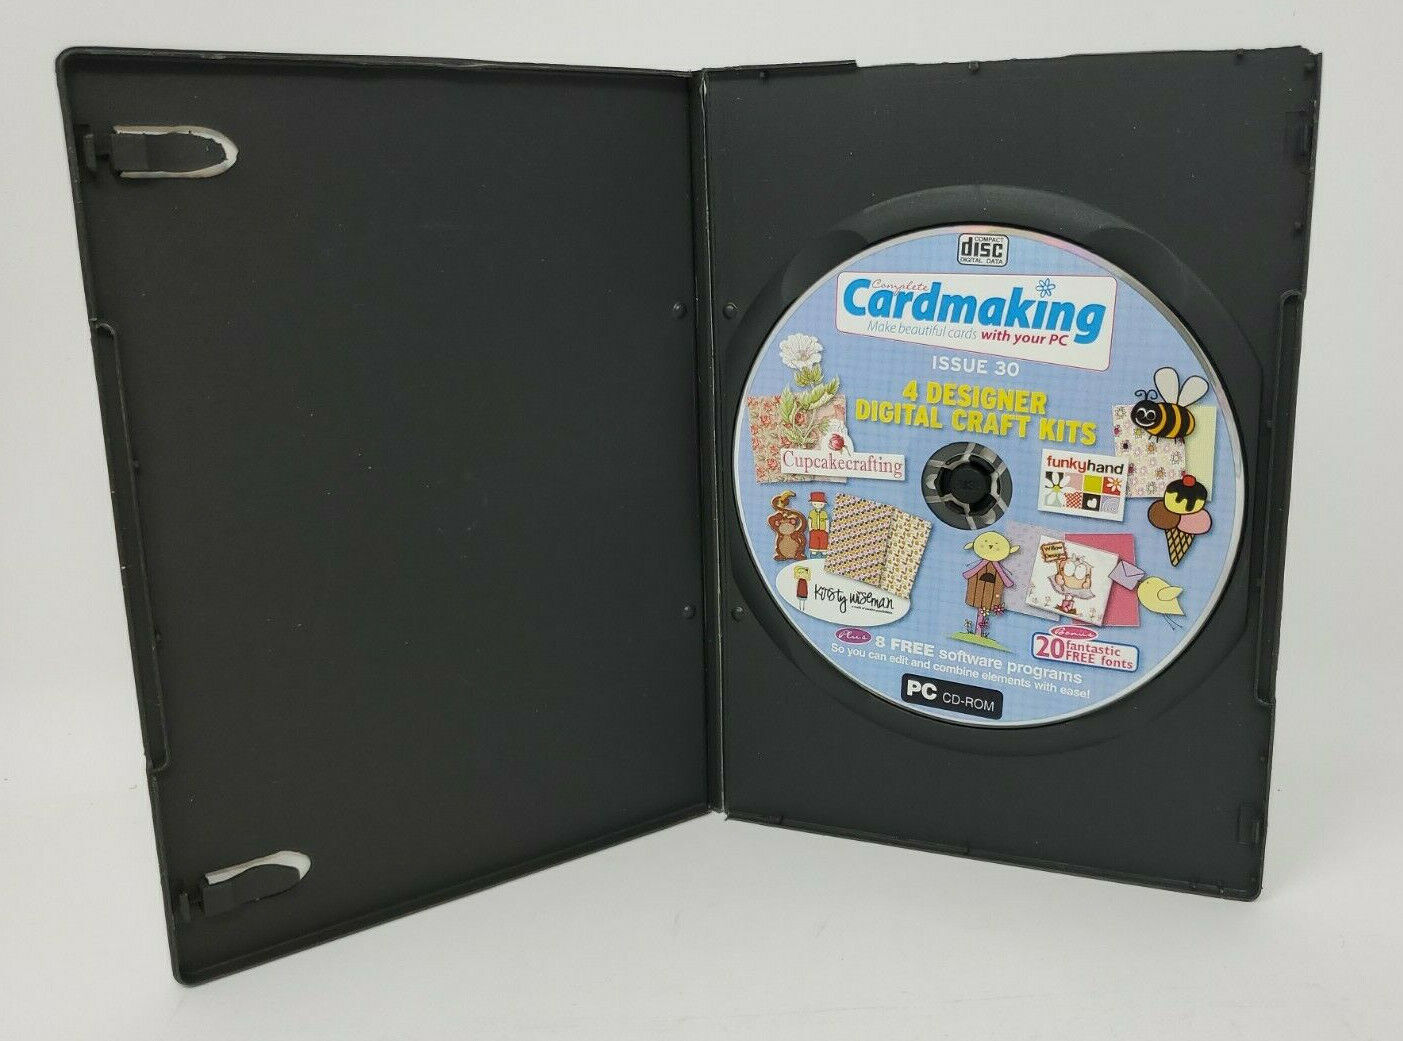 Lot of 2 Cardmaking CD ROMs - PC/MAC - Summer Daze and Complete Cardmaking 2011 Unbranded - фотография #5